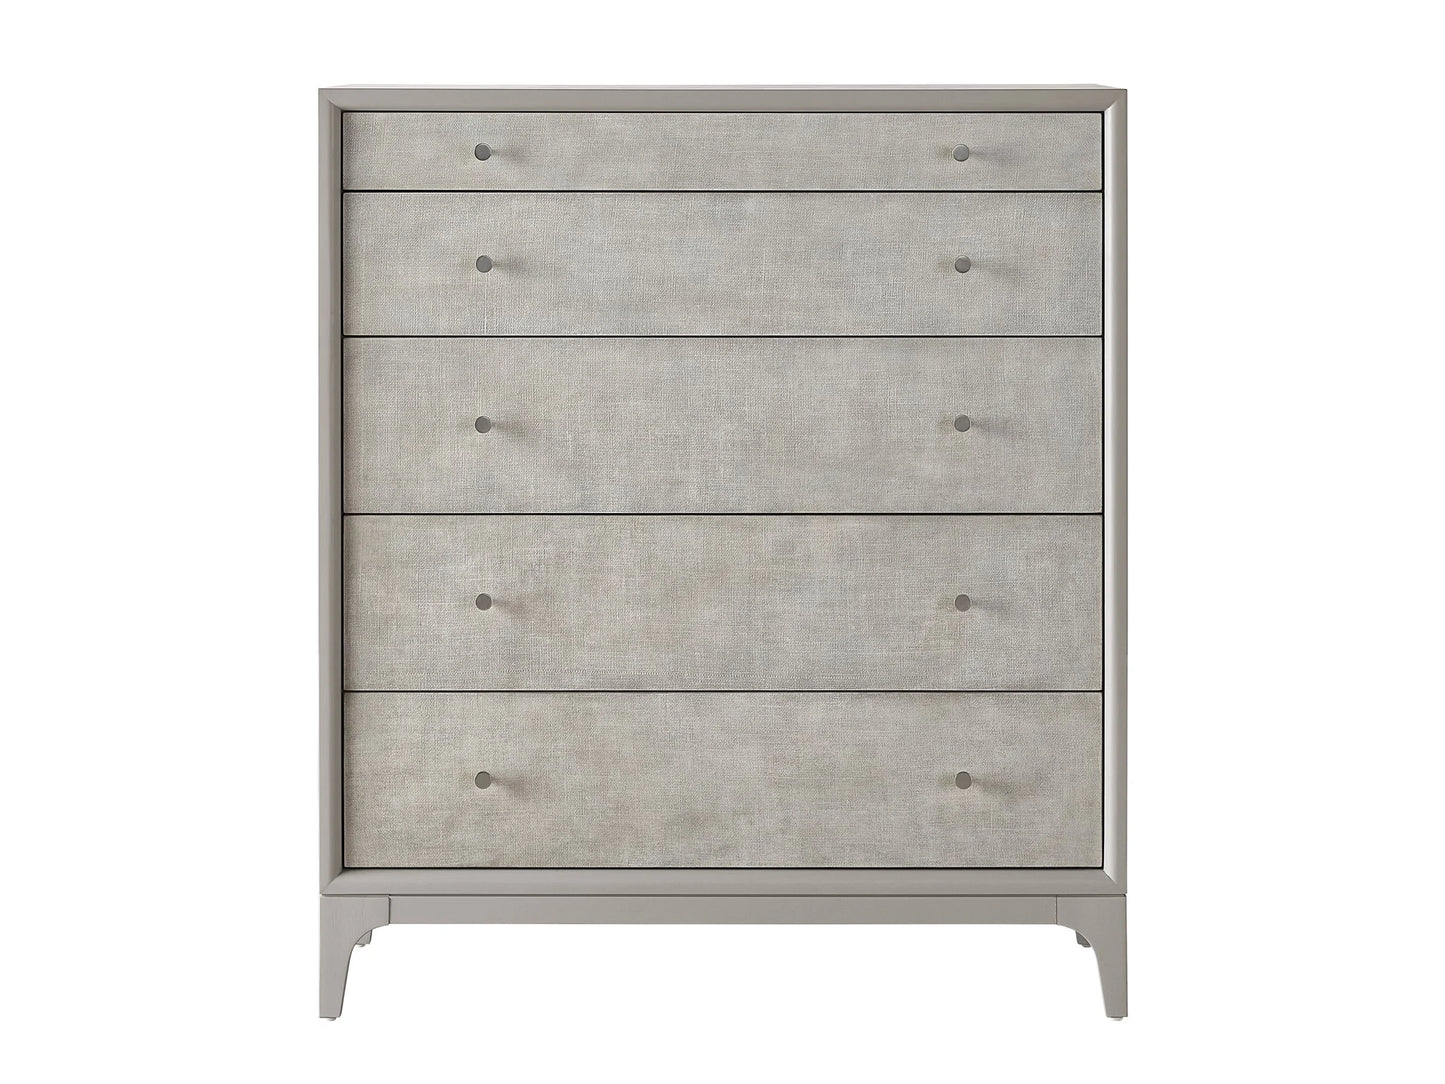 UNIVERSAL - TRANQUILITY - MIRANDA KERR HOME TRANQUILITY CHEST